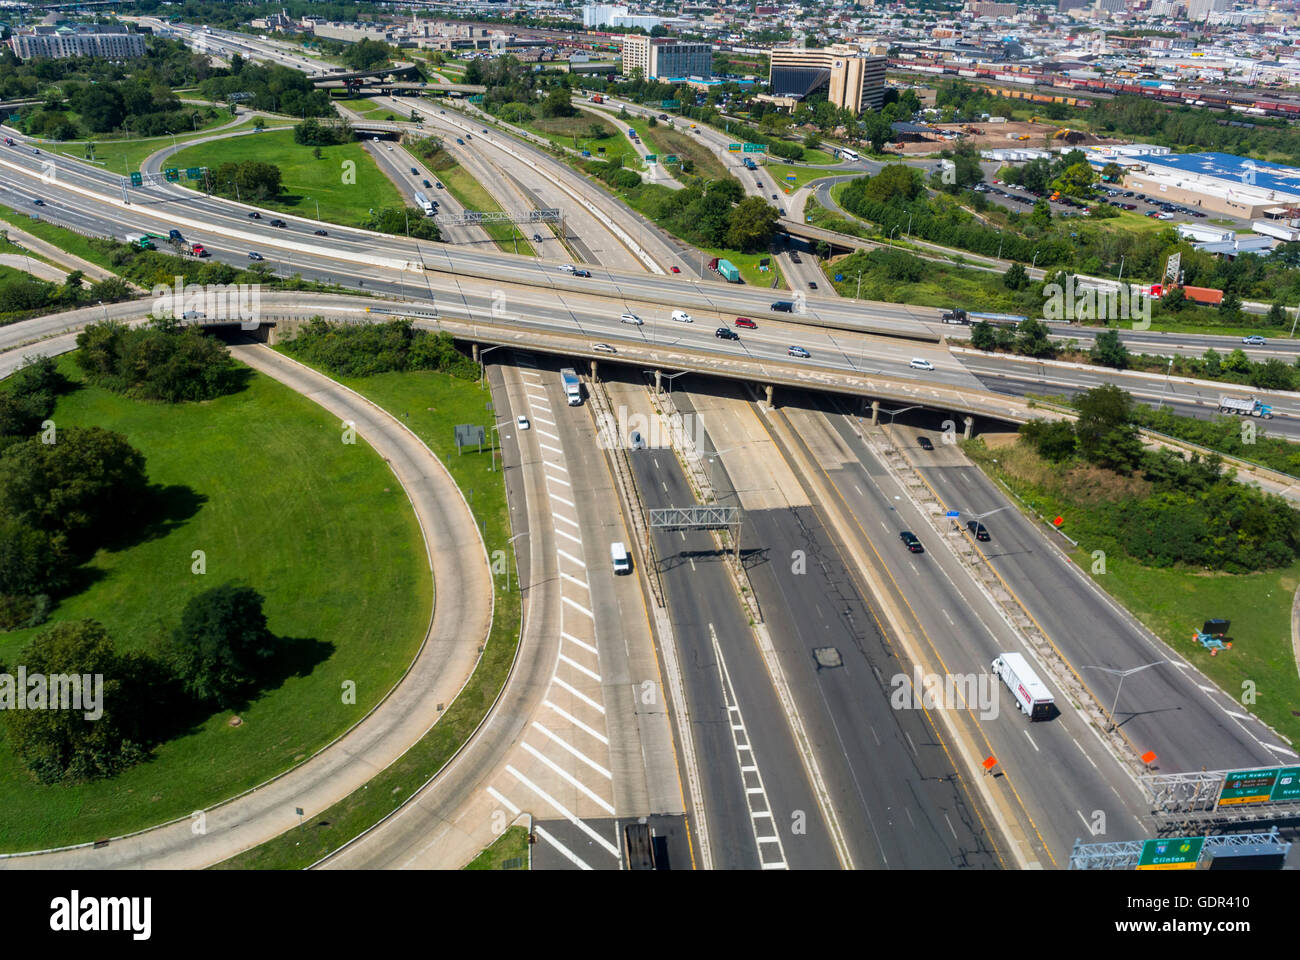 Newark, New Jersey, USA, Aerial View from Airplane, Cloverleaf Highway Exchange, Suburbs Stock Photo